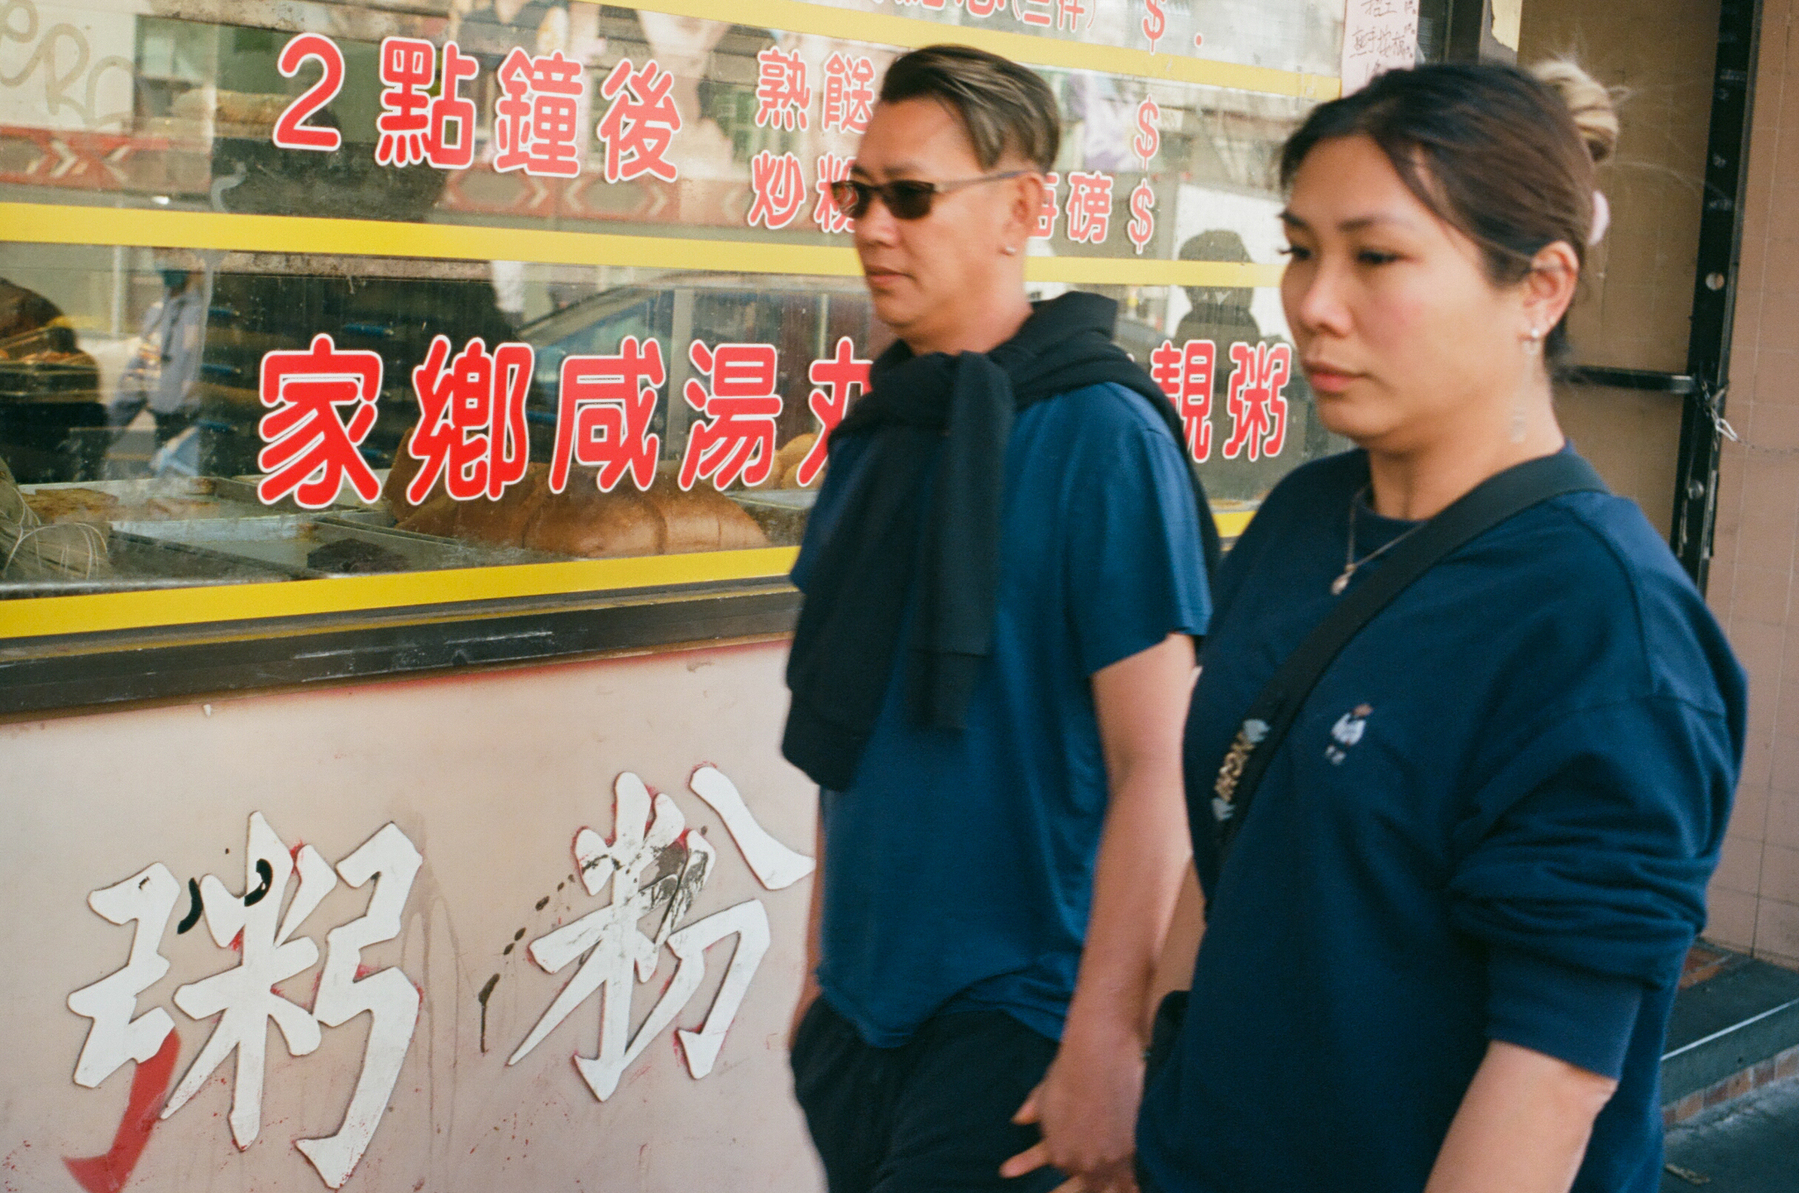 A color photograph of a Chinese restaurant with Chinese text on the windows, and an Asian couple walking in front of it